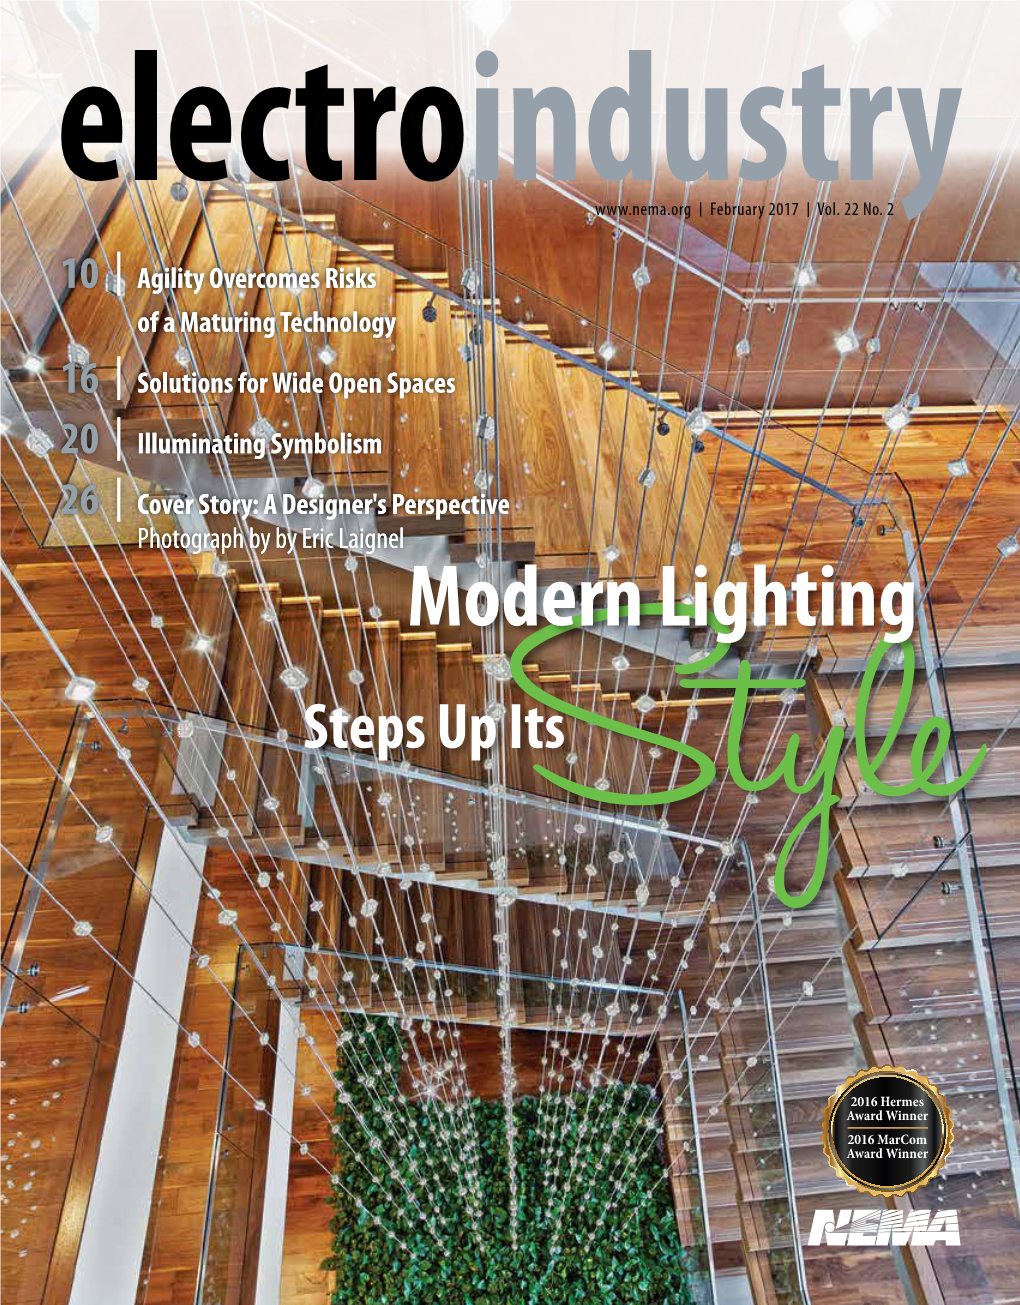 Electroindustry, February 2017 Issue